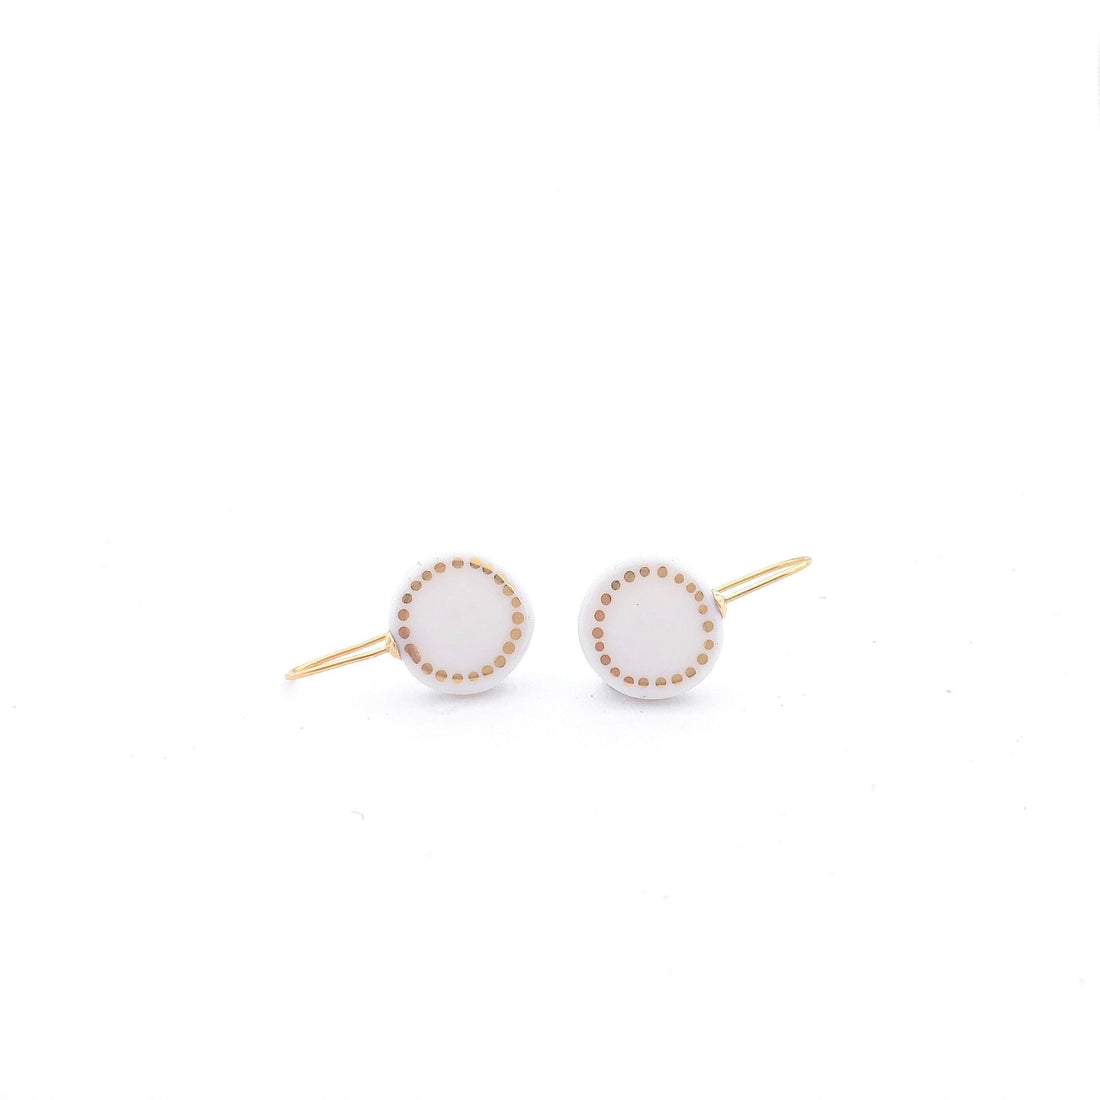 White Porcelain earrings with 24k gold dots, Classic jewelry, natural look